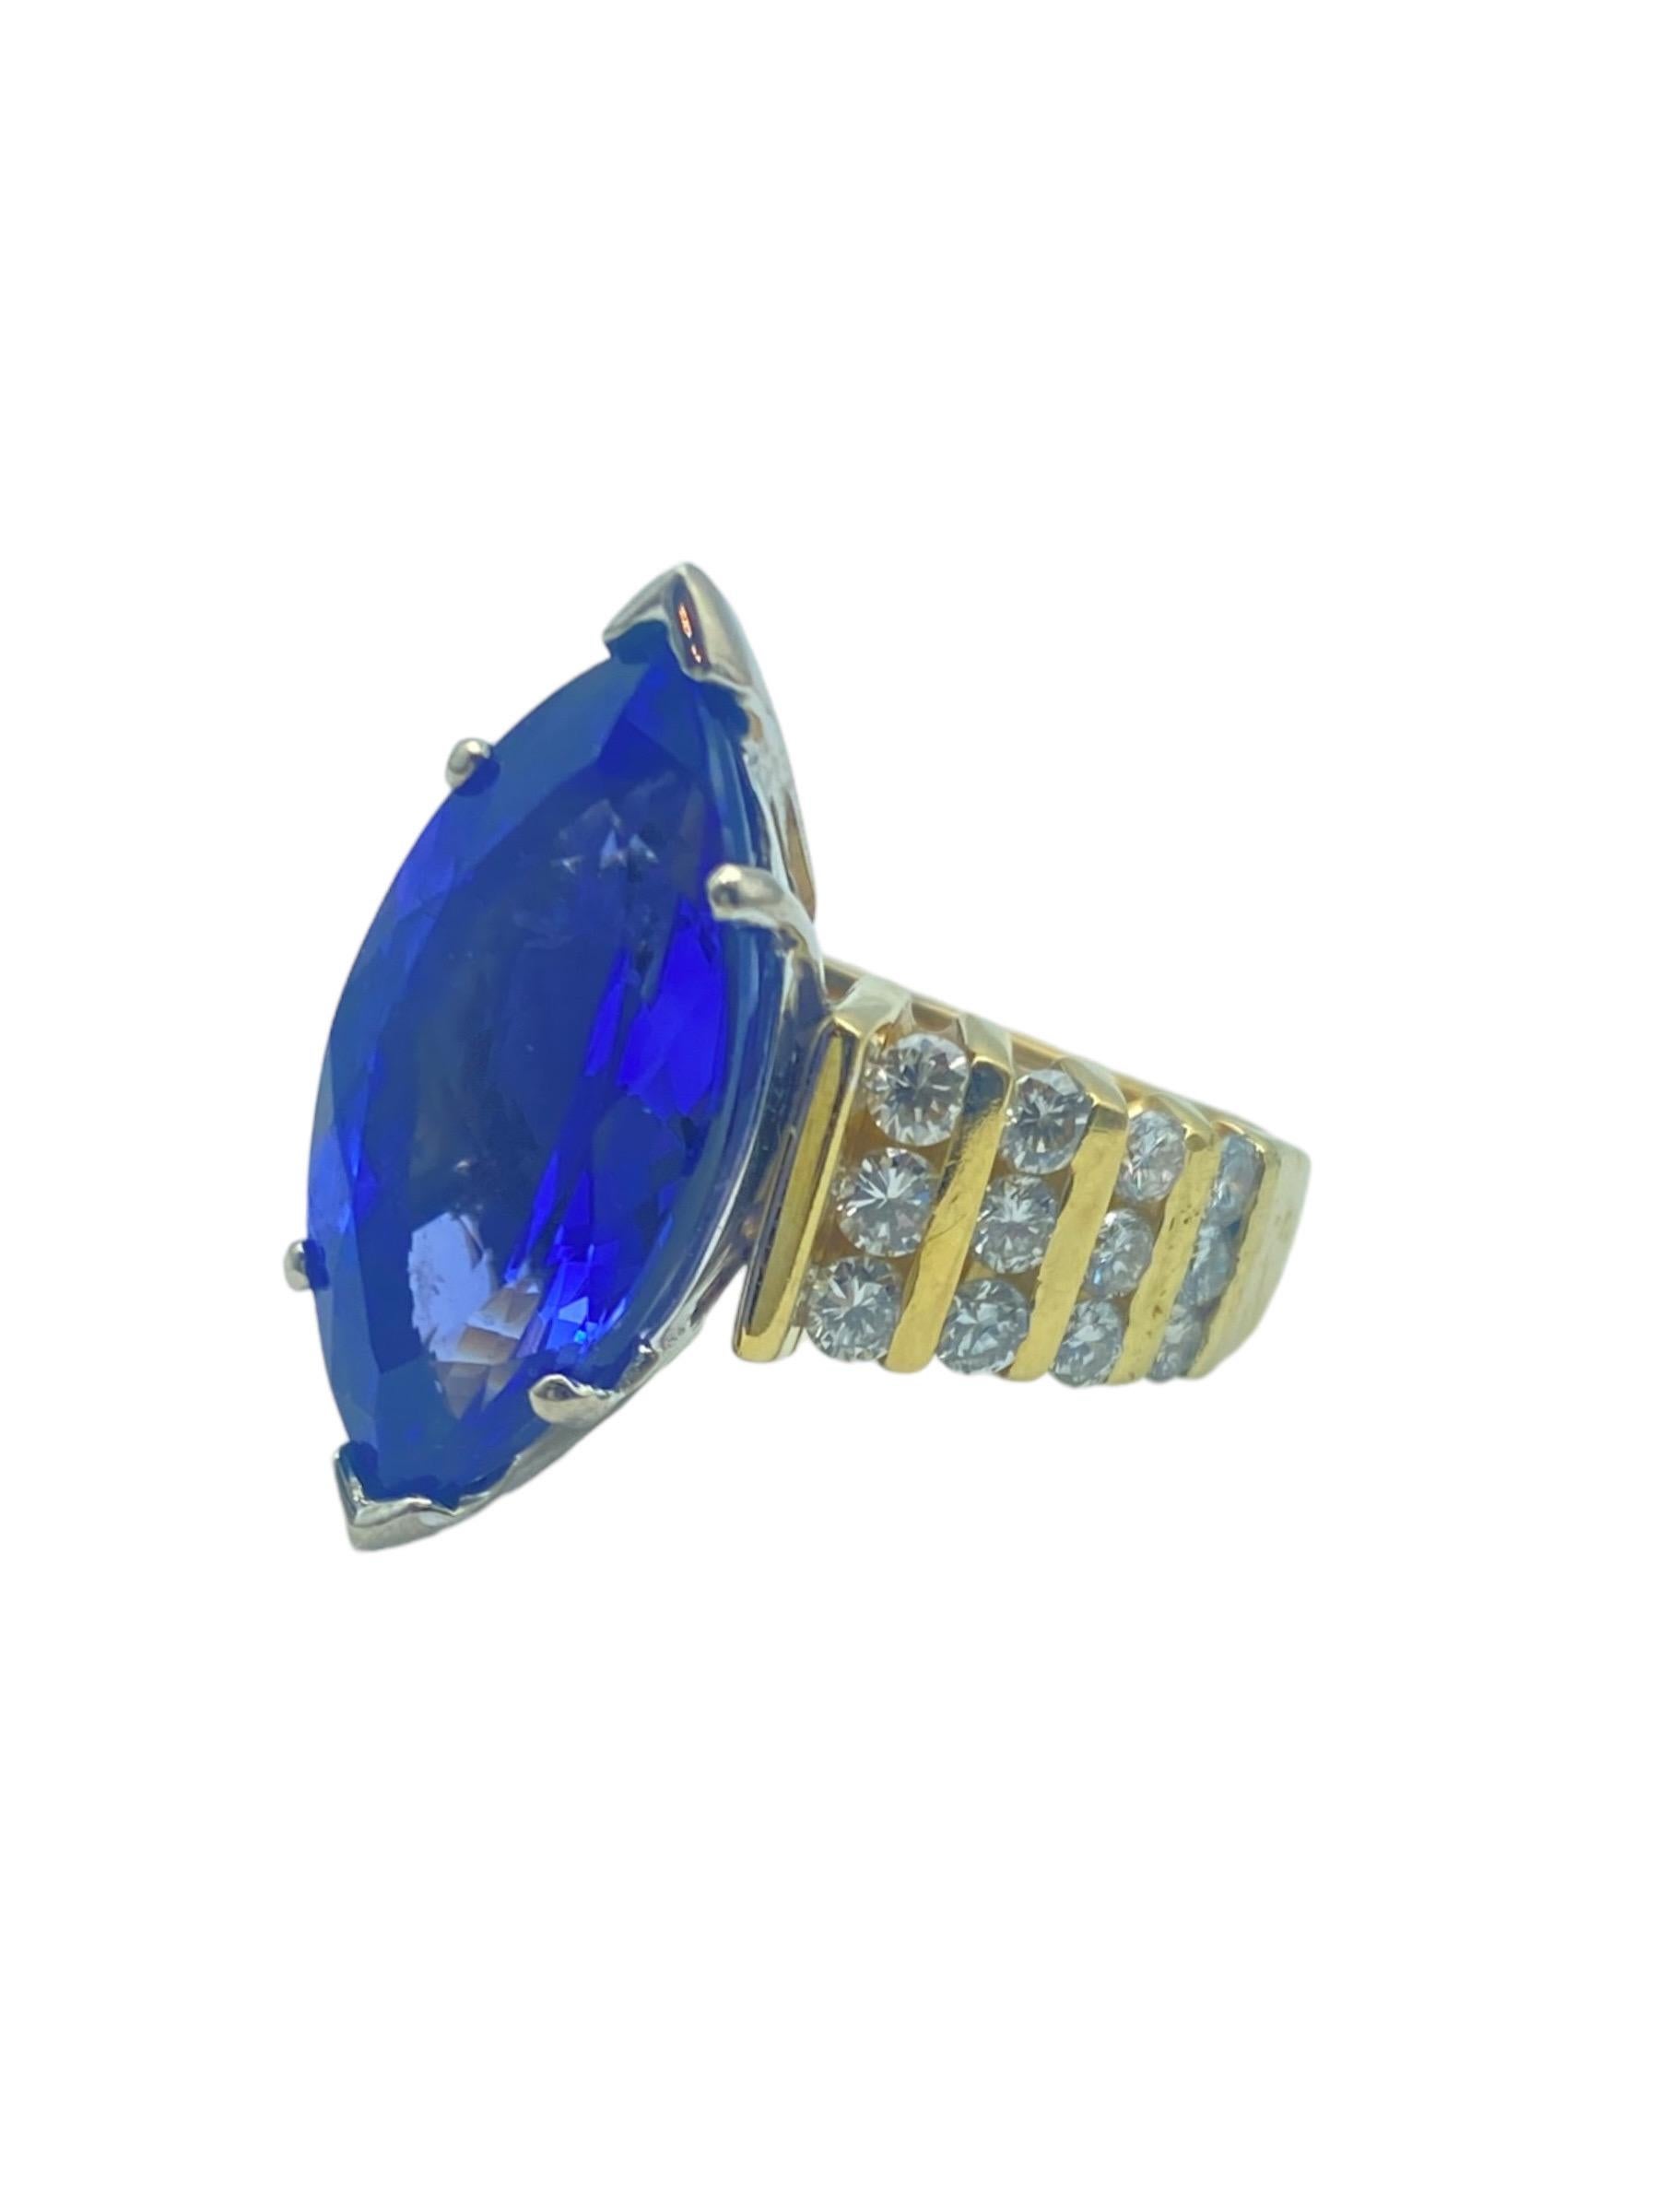 This AAA-featured tanzanite stone is a deep colored of high-quality gemstone shaped in a marquise cut. The ring is accented with twenty-four round and brilliant cut diamonds on either side of the ring (total). The diamonds weigh 1.00 carat, and the